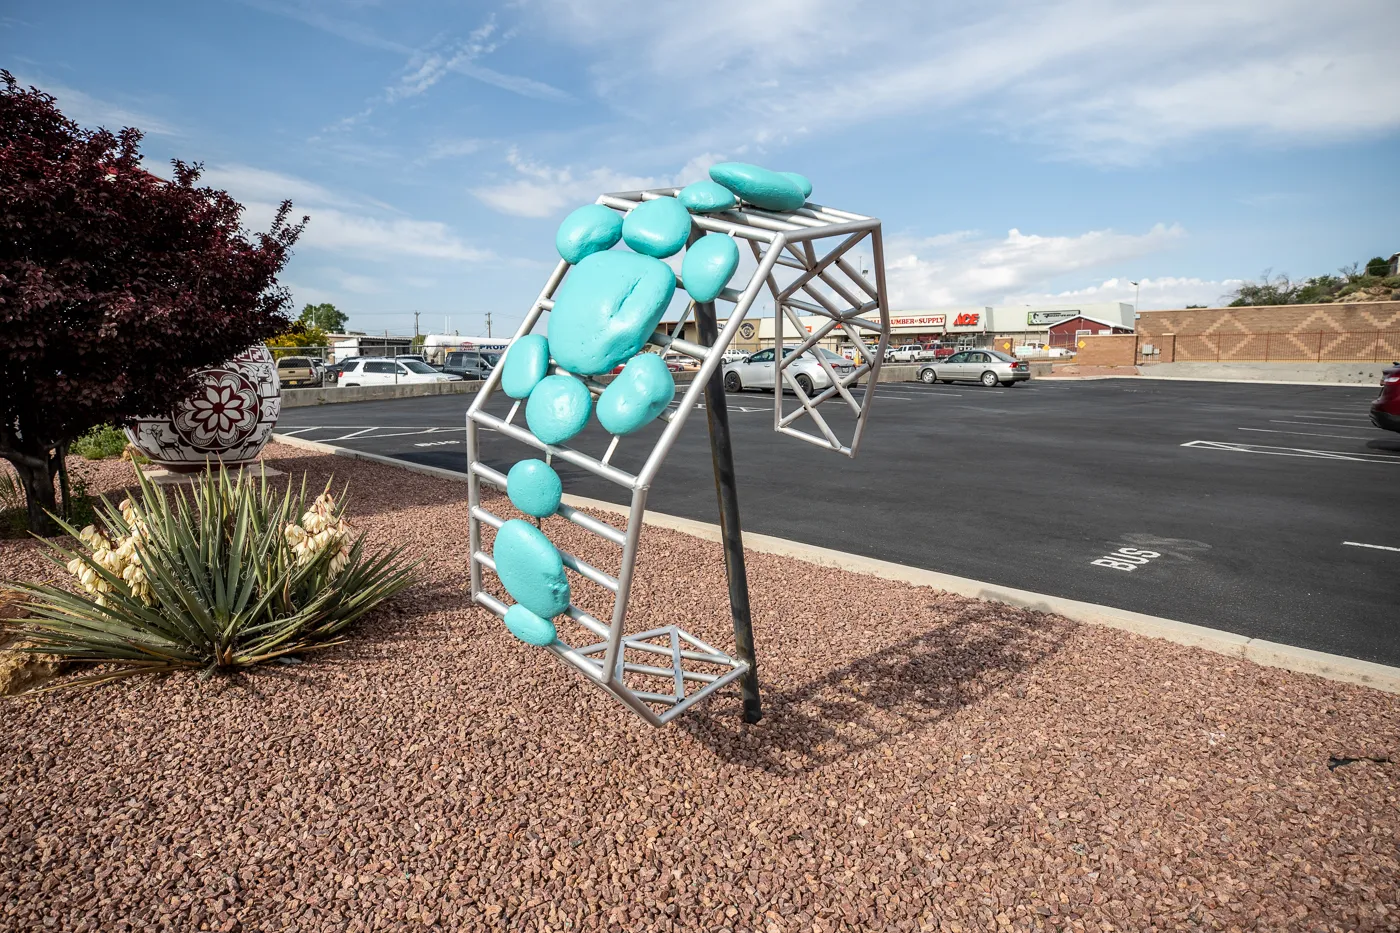 Turquoise Jewelry Sculpture at Perry Null Trading Company in Gallup, New Mexico